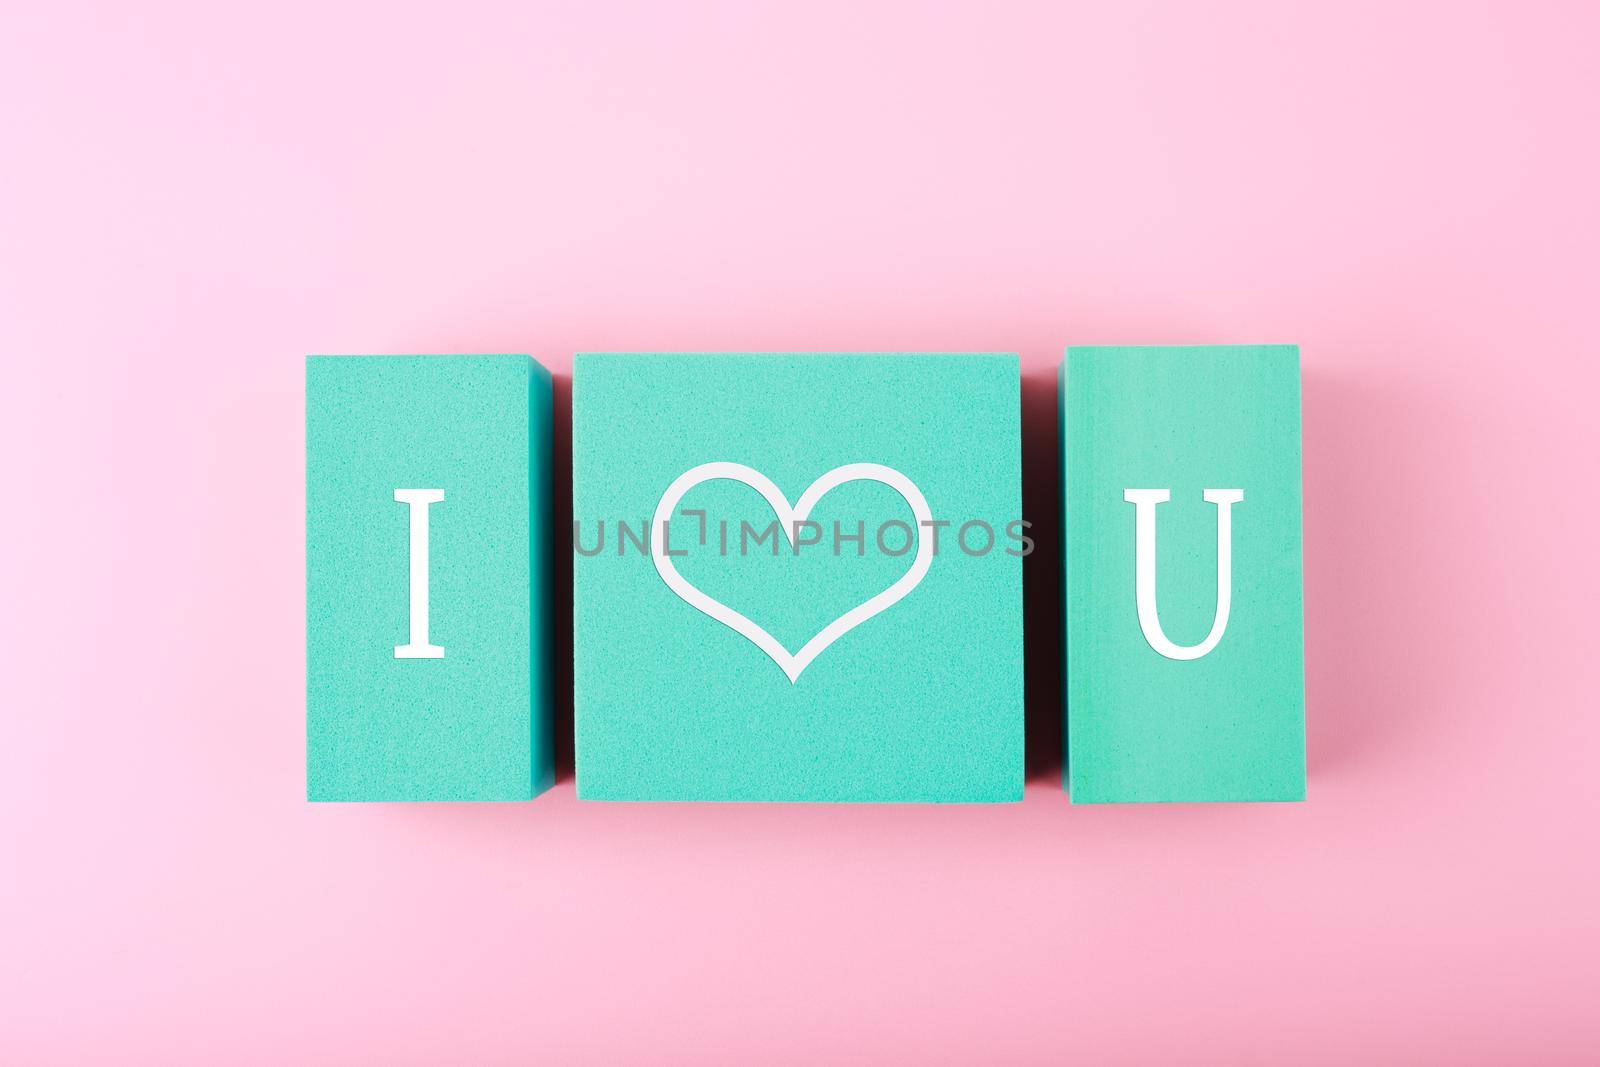 I love you creative minimal concept in pink colors. Template, banner, postcard or flyer for St. Valentine's day